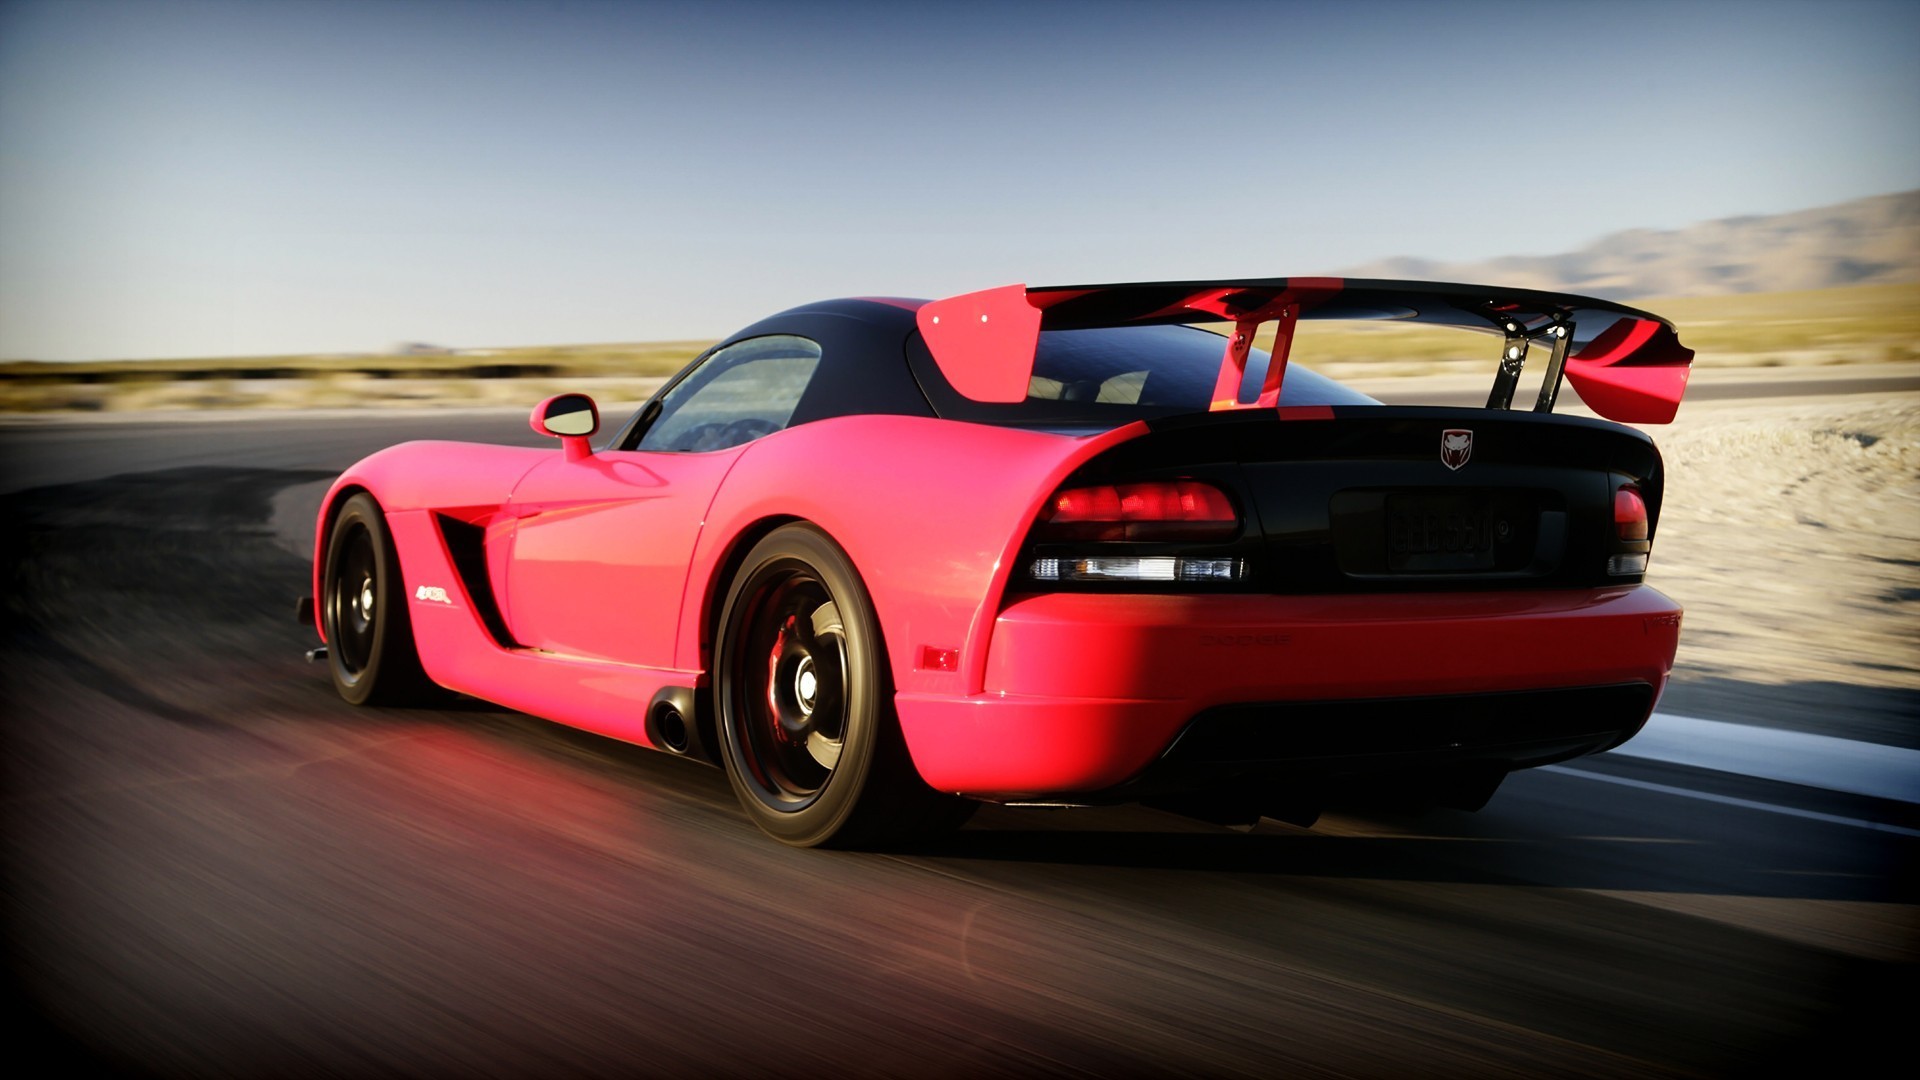 dodge, Viper, Vehicles, Cars, Exotic, Tuning, Wings, Color, Wheels, Pink, Roads, Race, Track, Racing, Motion, Supercar Wallpaper